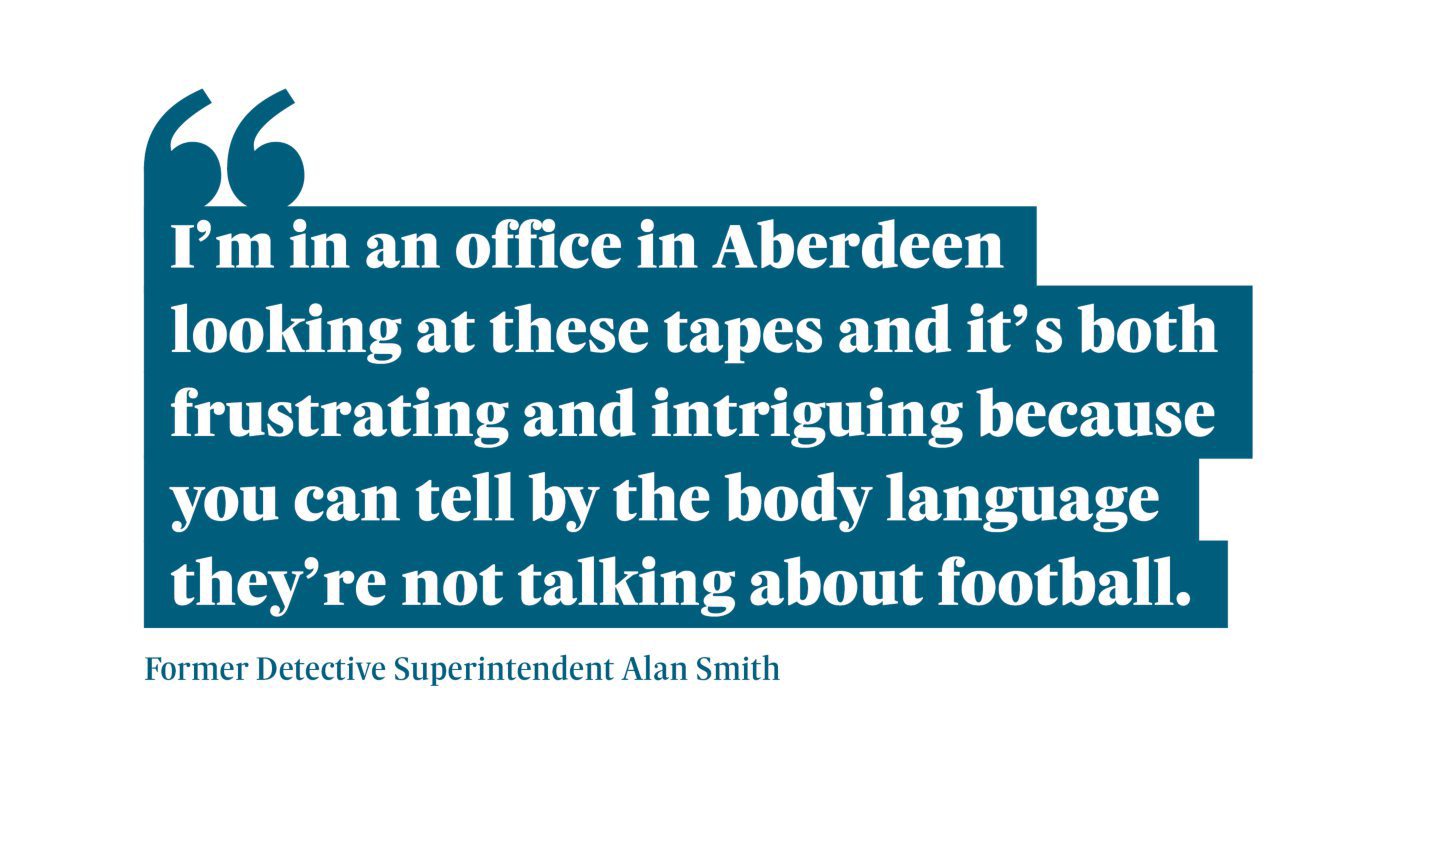 Quote from Former Detective Superintendent Alan Smith saying: “I’m in an office in Aberdeen looking at these tapes and it’s both frustrating and intriguing because you can tell by the body language they’re not talking about football.”